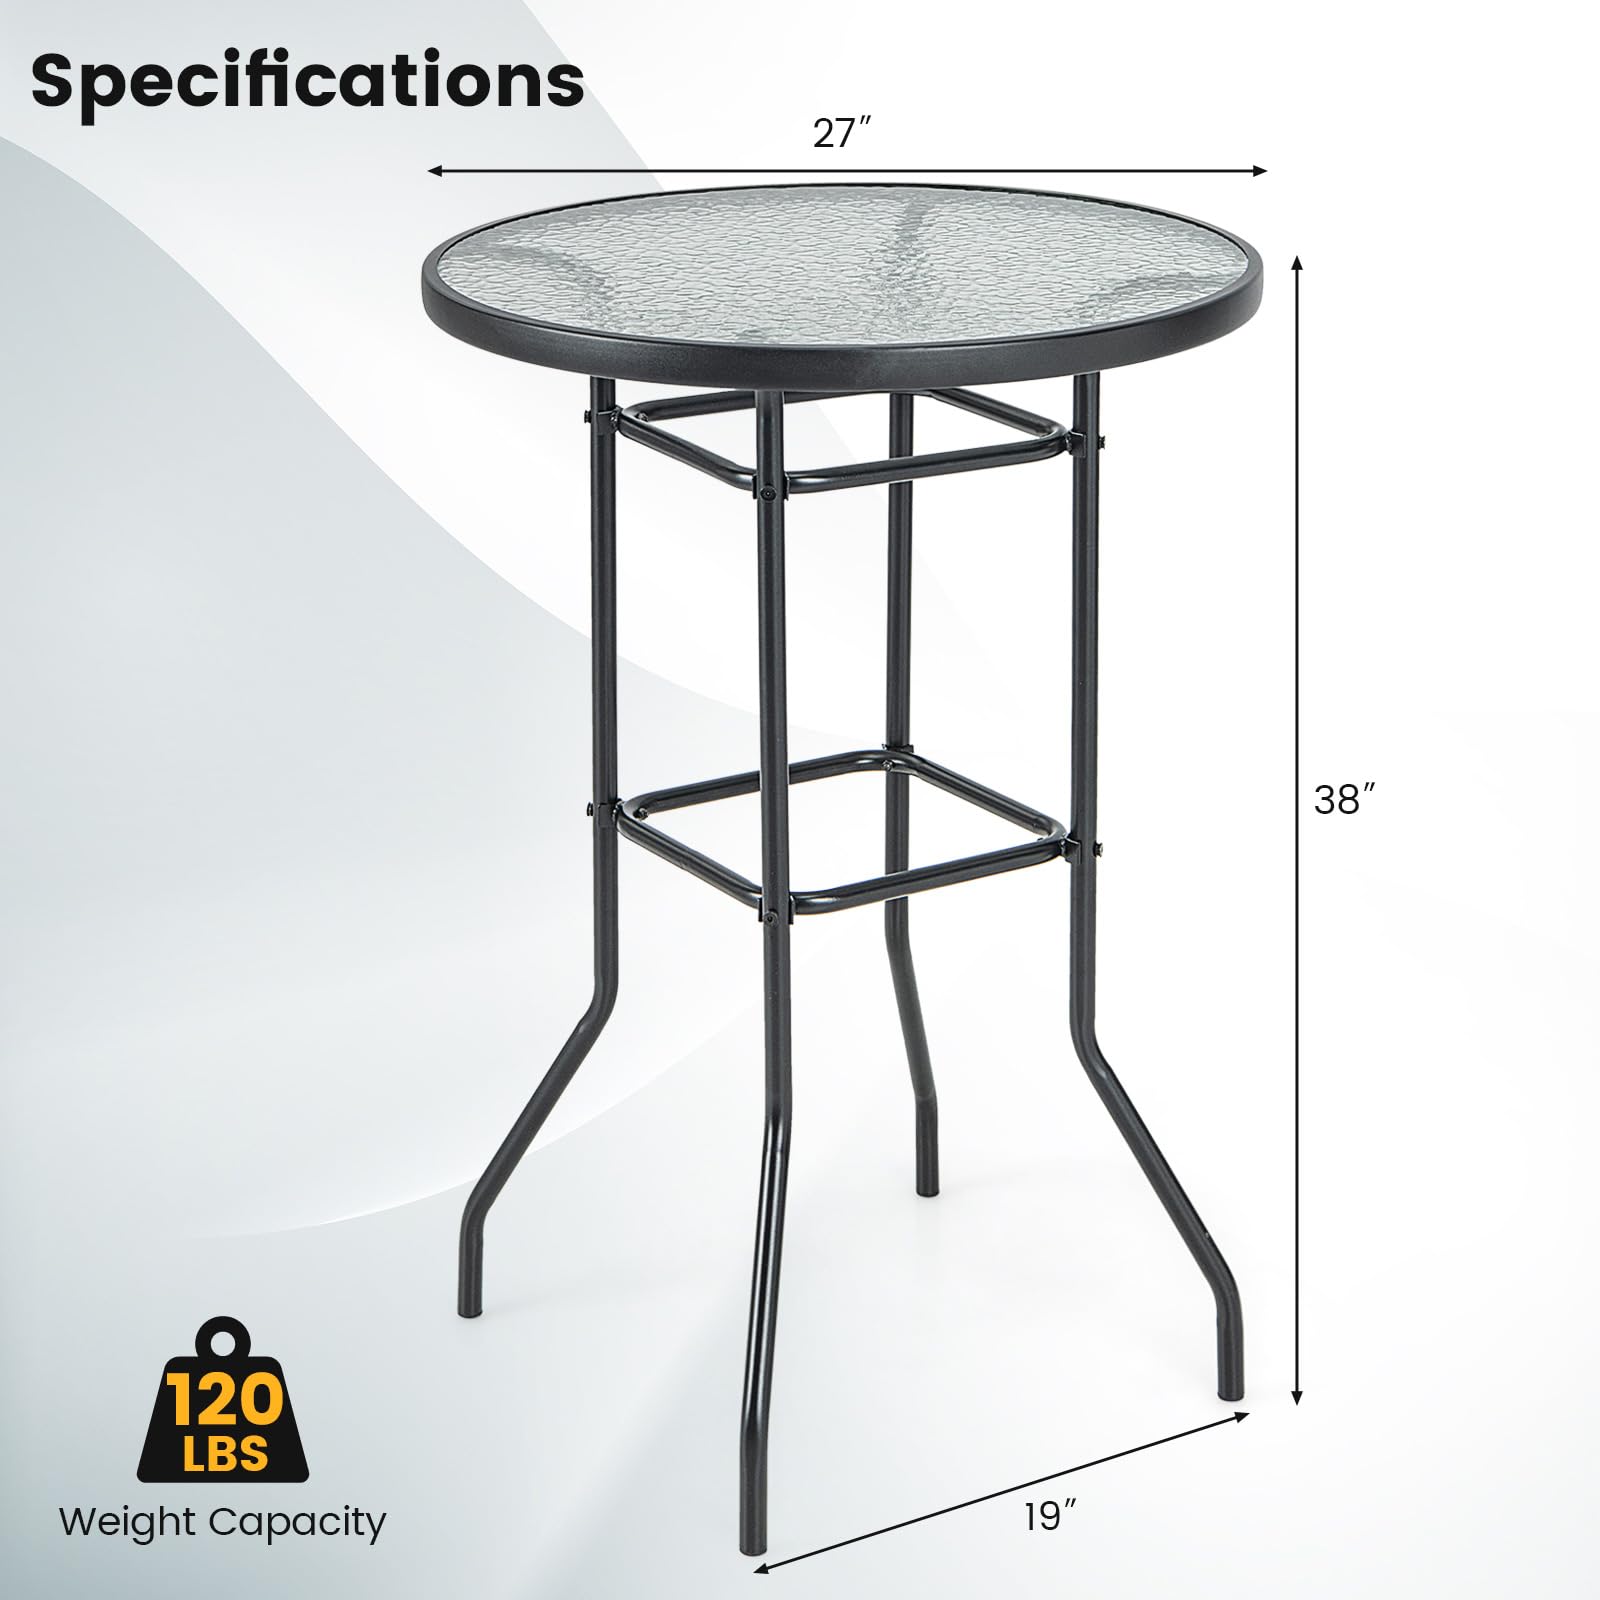 Giantex Patio Bar Table, 38" Height High Top Bistro Table, 27" Round Tempered Glass Tabletop